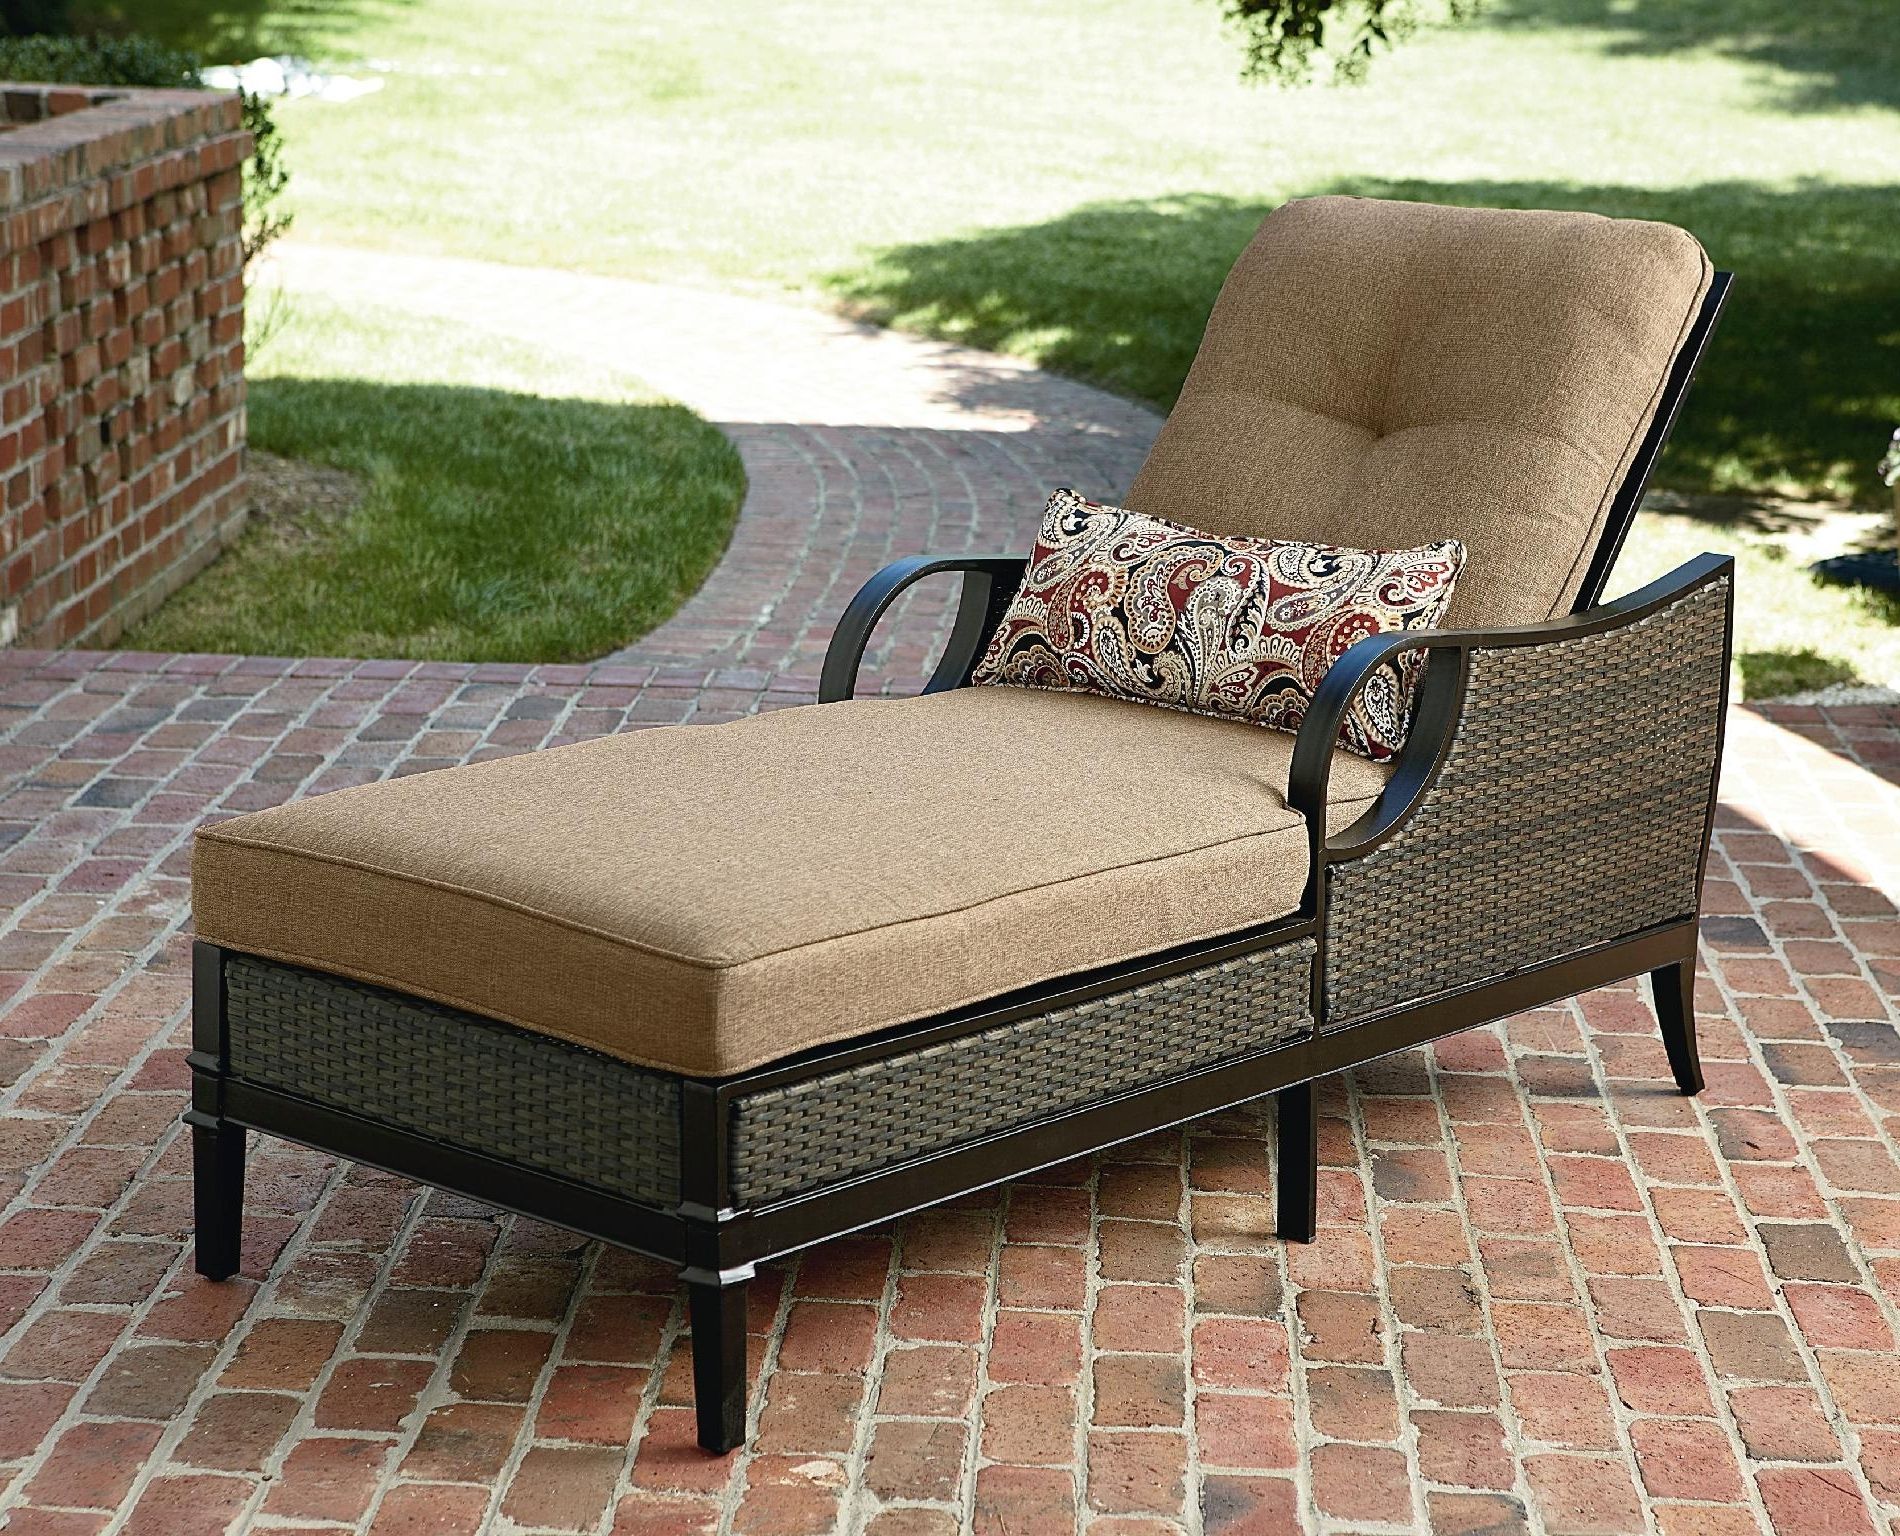 Chaise Lounge Chairs For Patio Regarding 2017 Lounge Chair Patio Sets • Lounge Chairs Ideas (View 5 of 15)